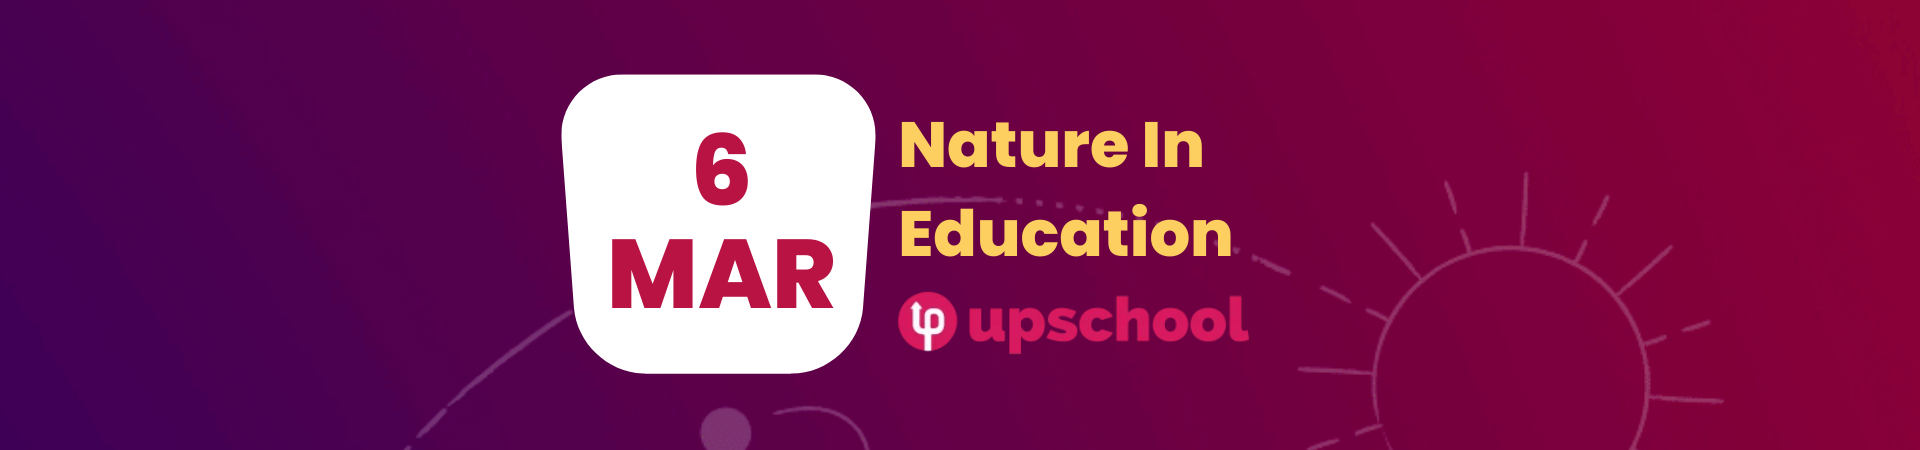 Nature In Education